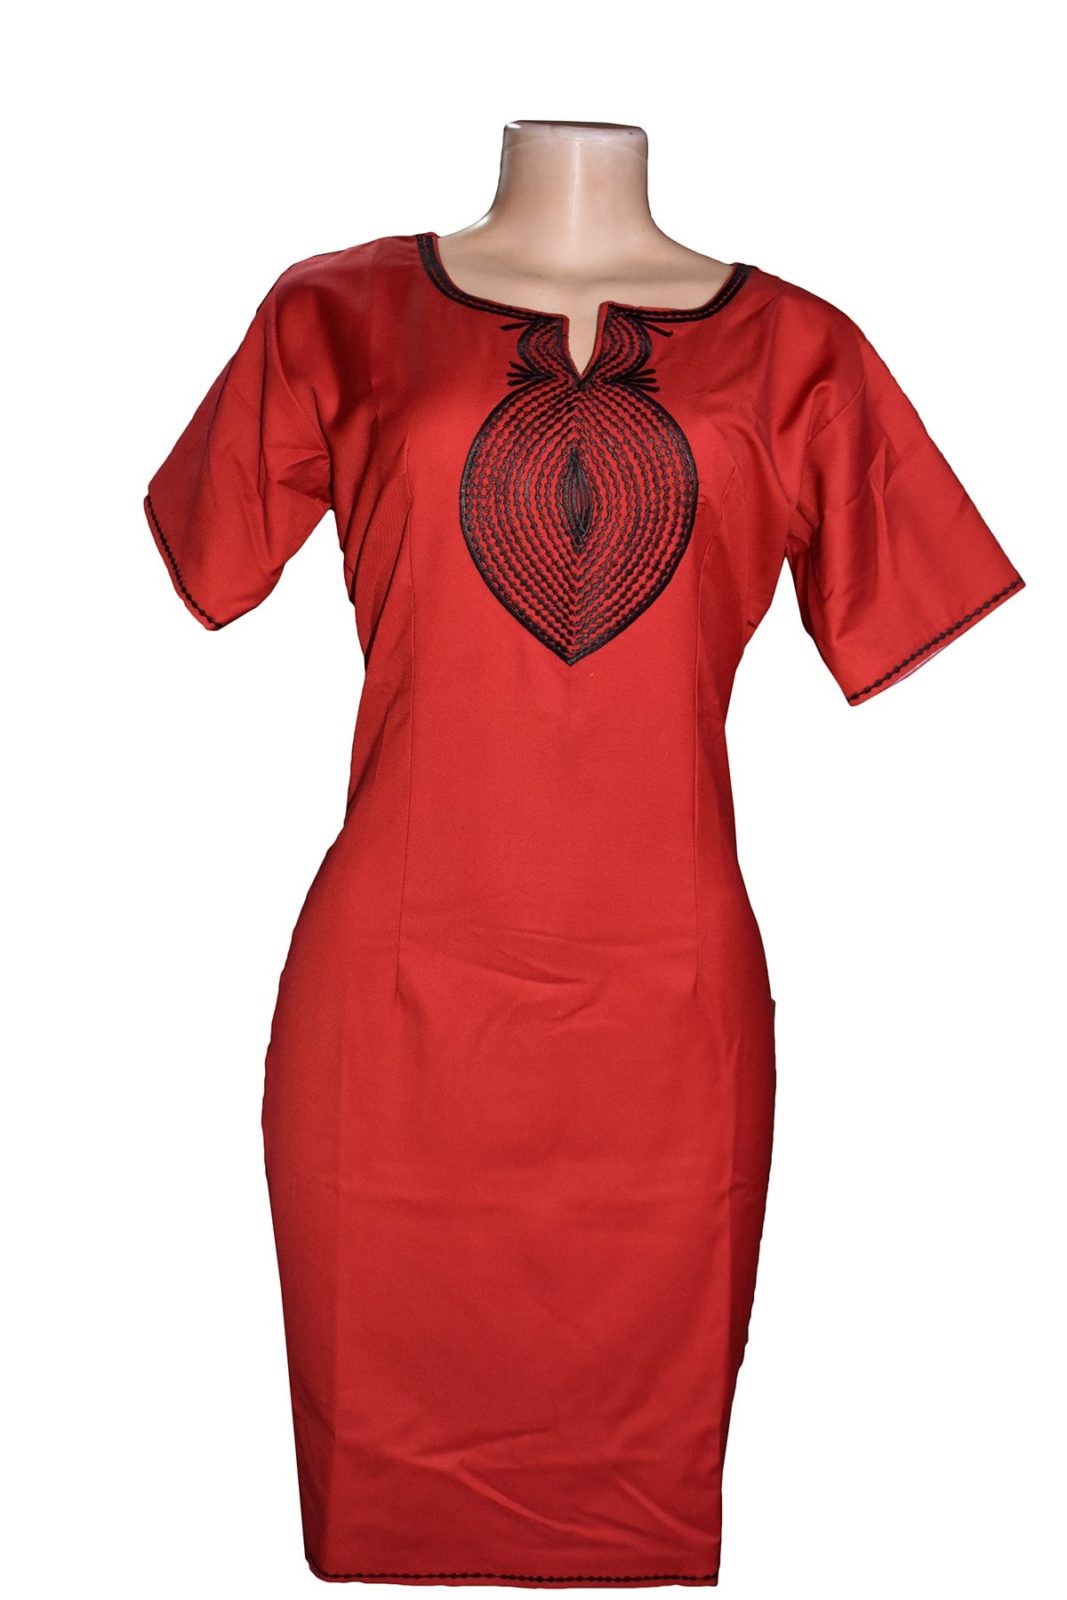 Love Embroidered African Dress - best african designs - African Bravo ...